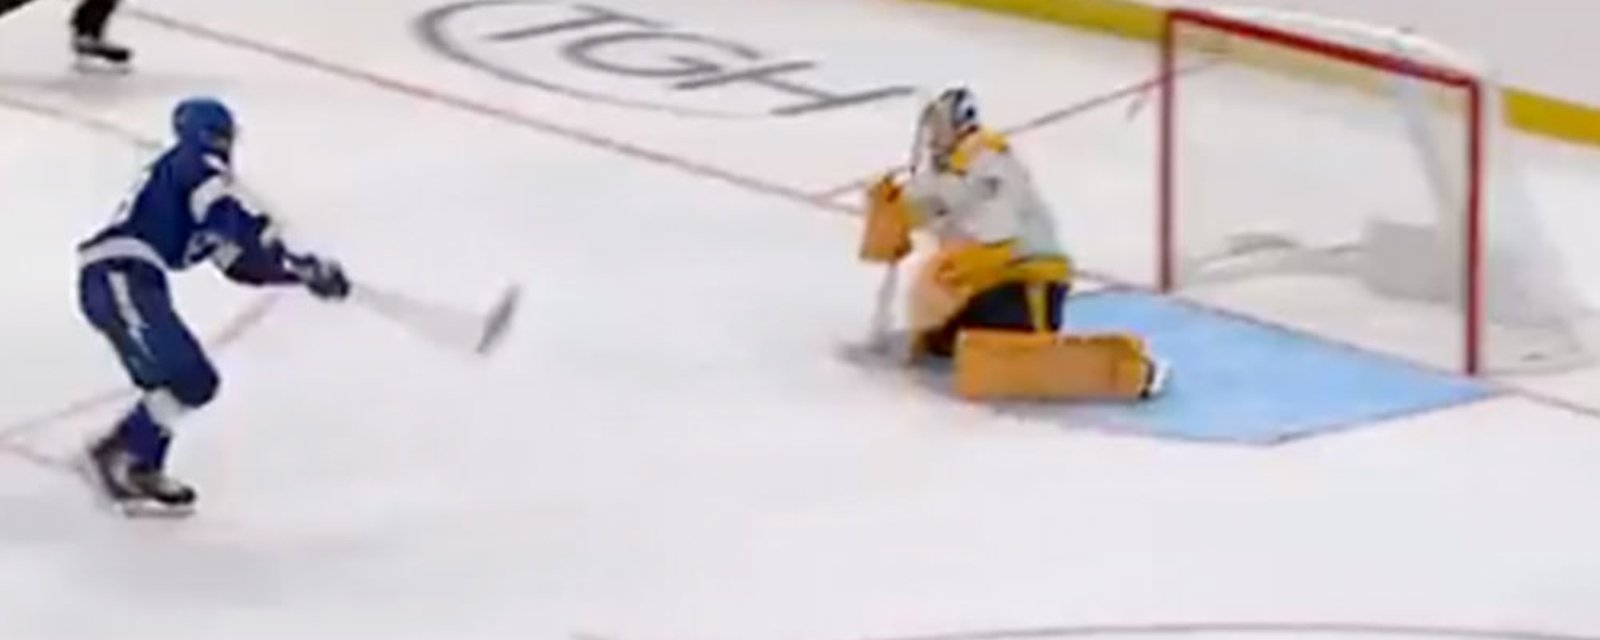 Hagel absolutely snipes one past Saros after being hauled down by Schenn